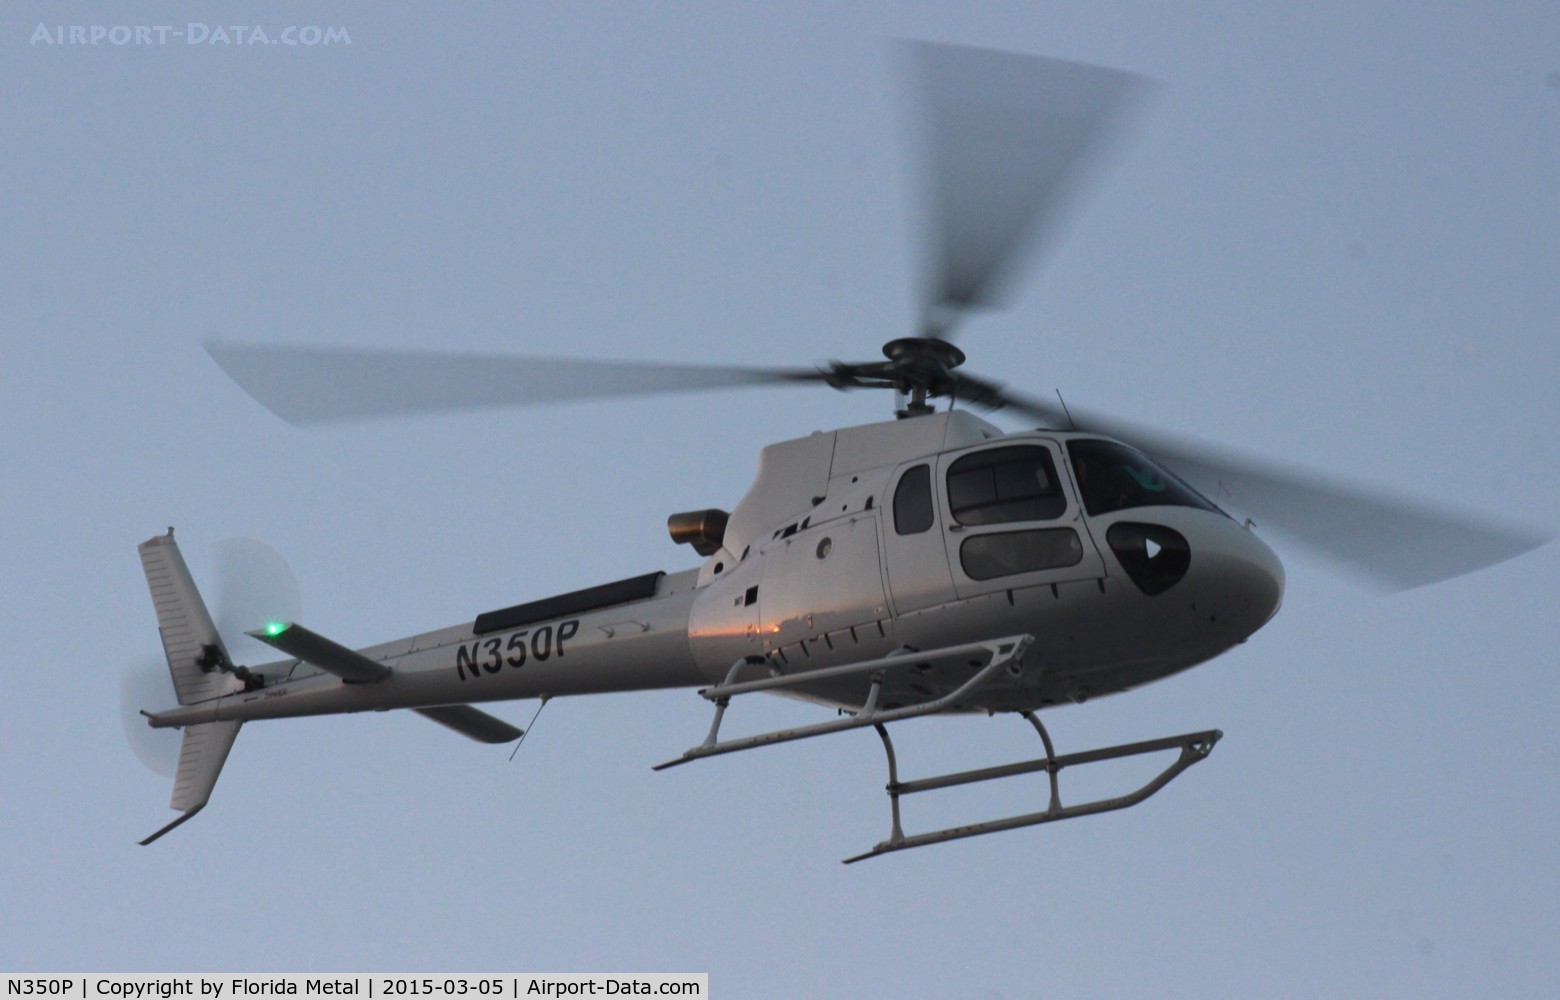 N350P, 2014 Airbus Helicopters AS-350B-3 Ecureuil C/N 7853, AS-350 at Heliexpo Orlando